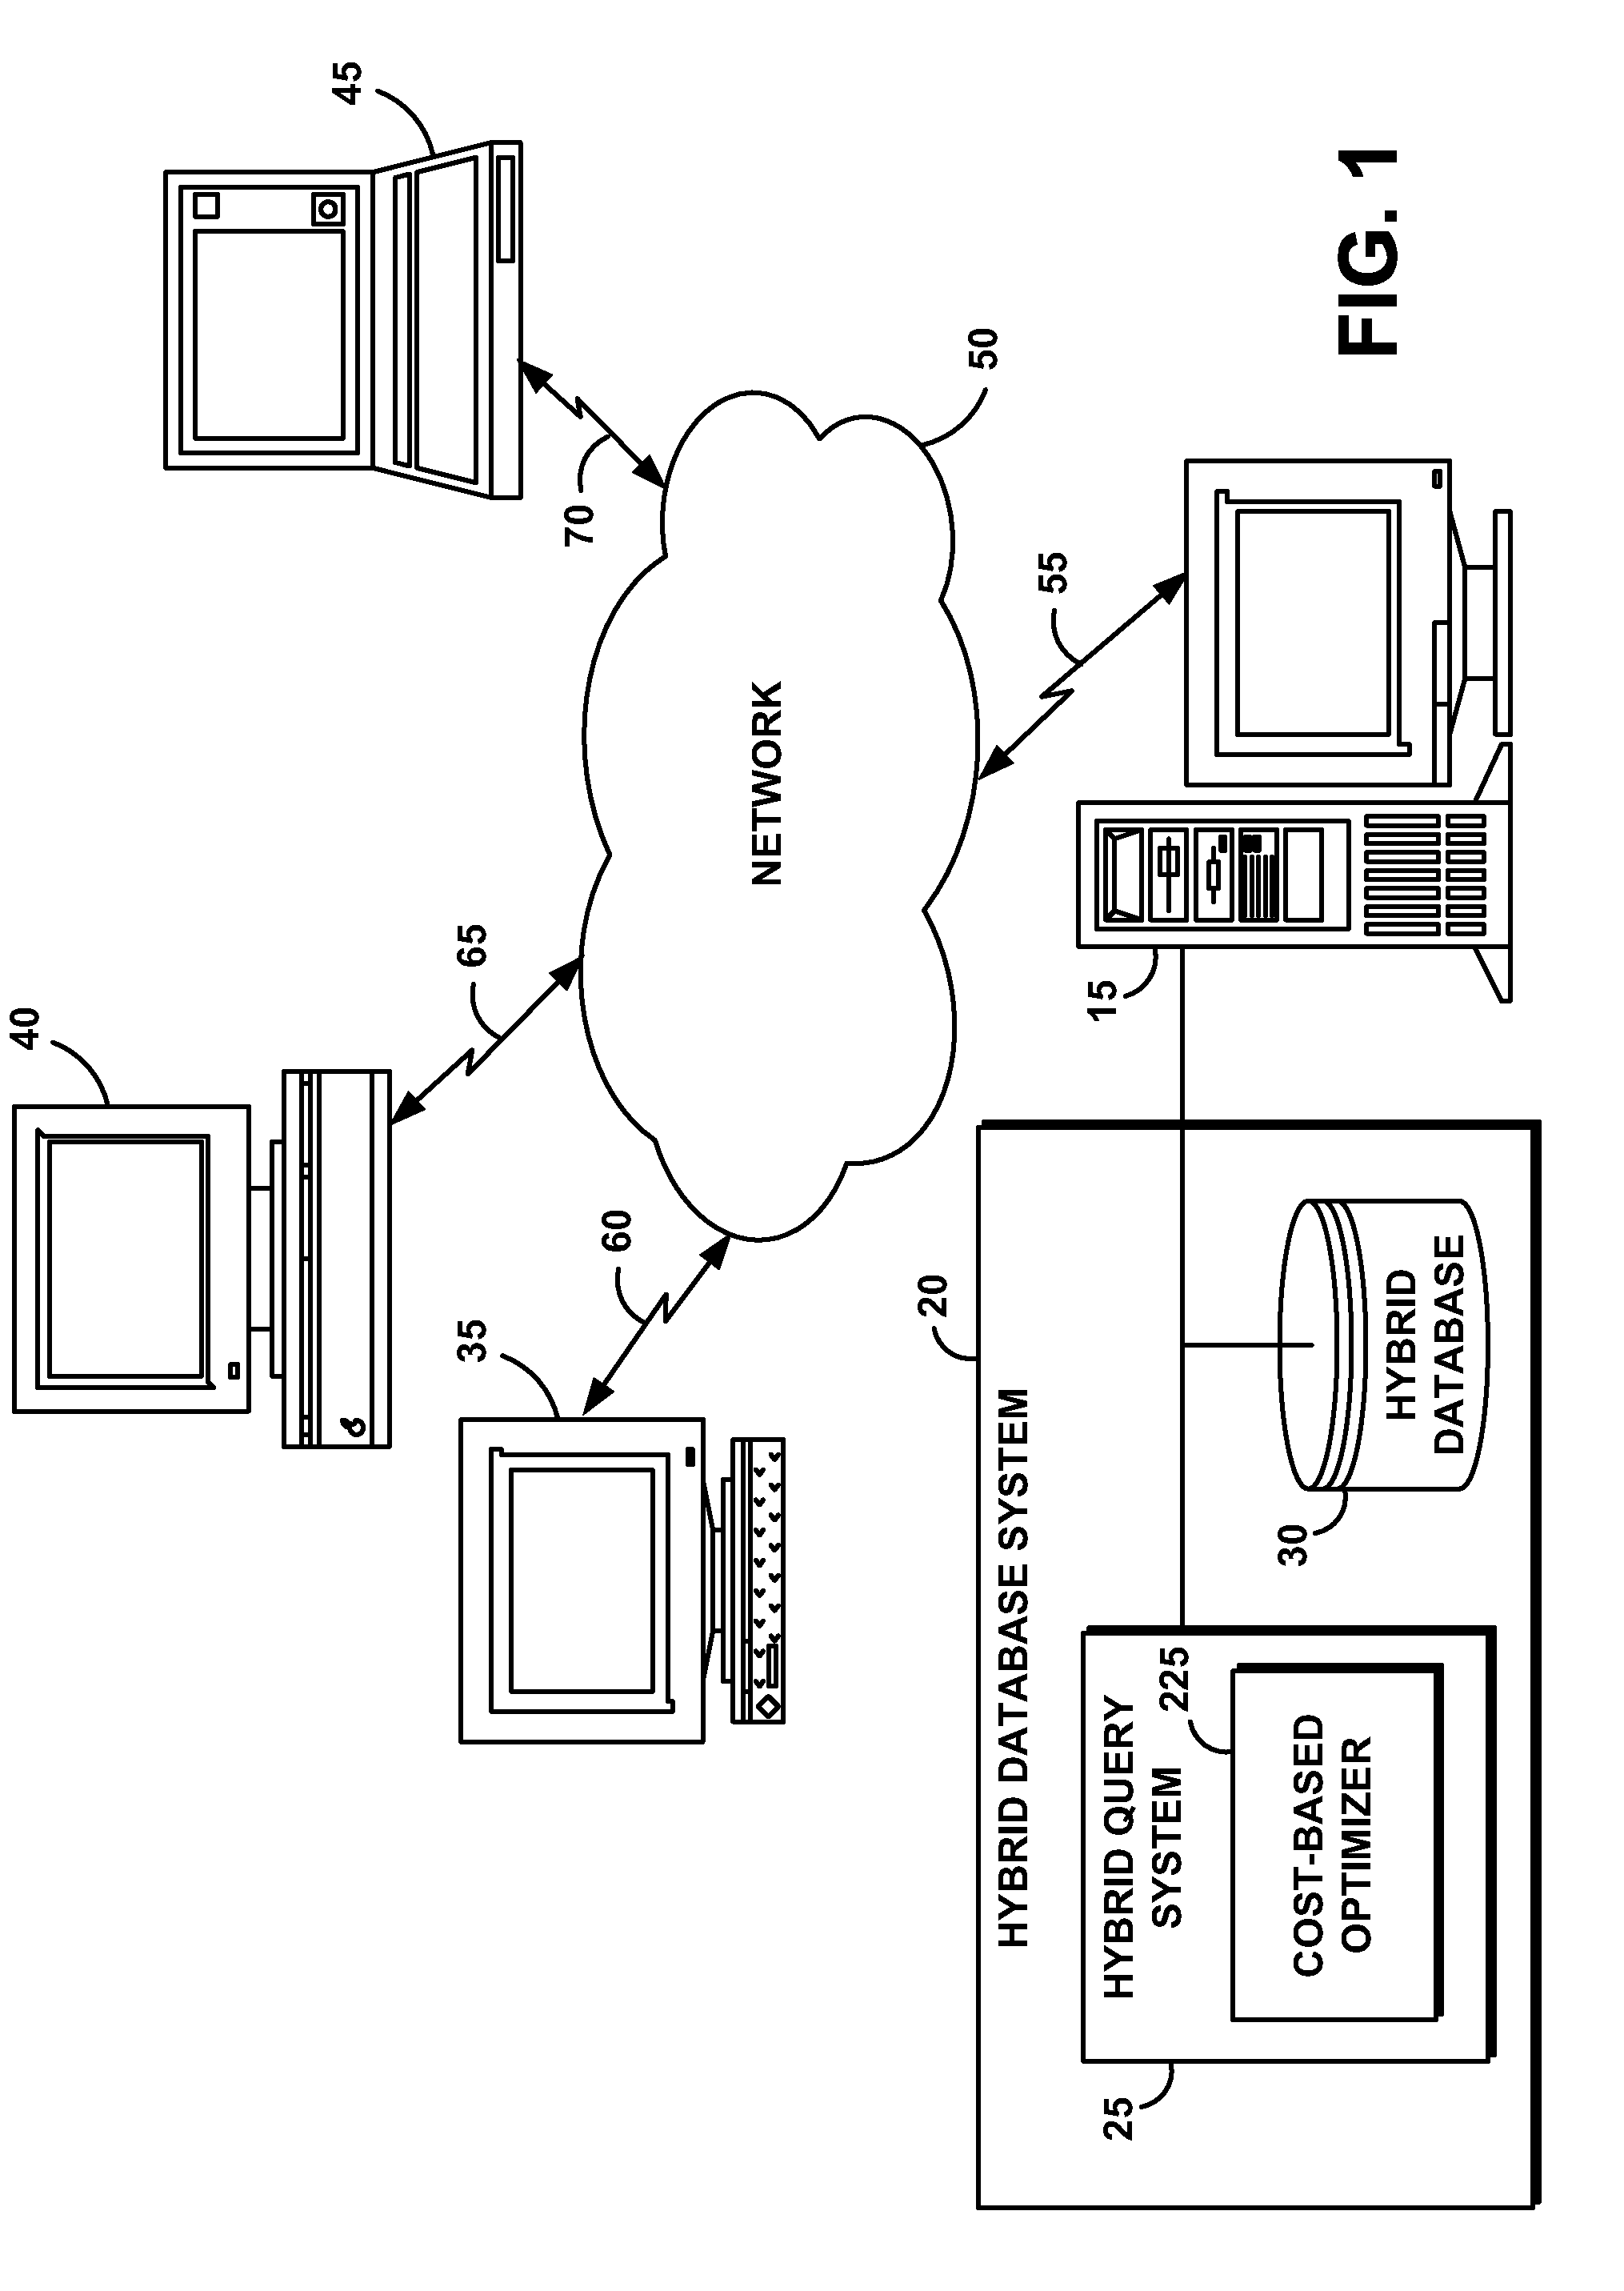 System and Method for Optimizing Query Access to a Database Comprising Hierarchically-Organized Data